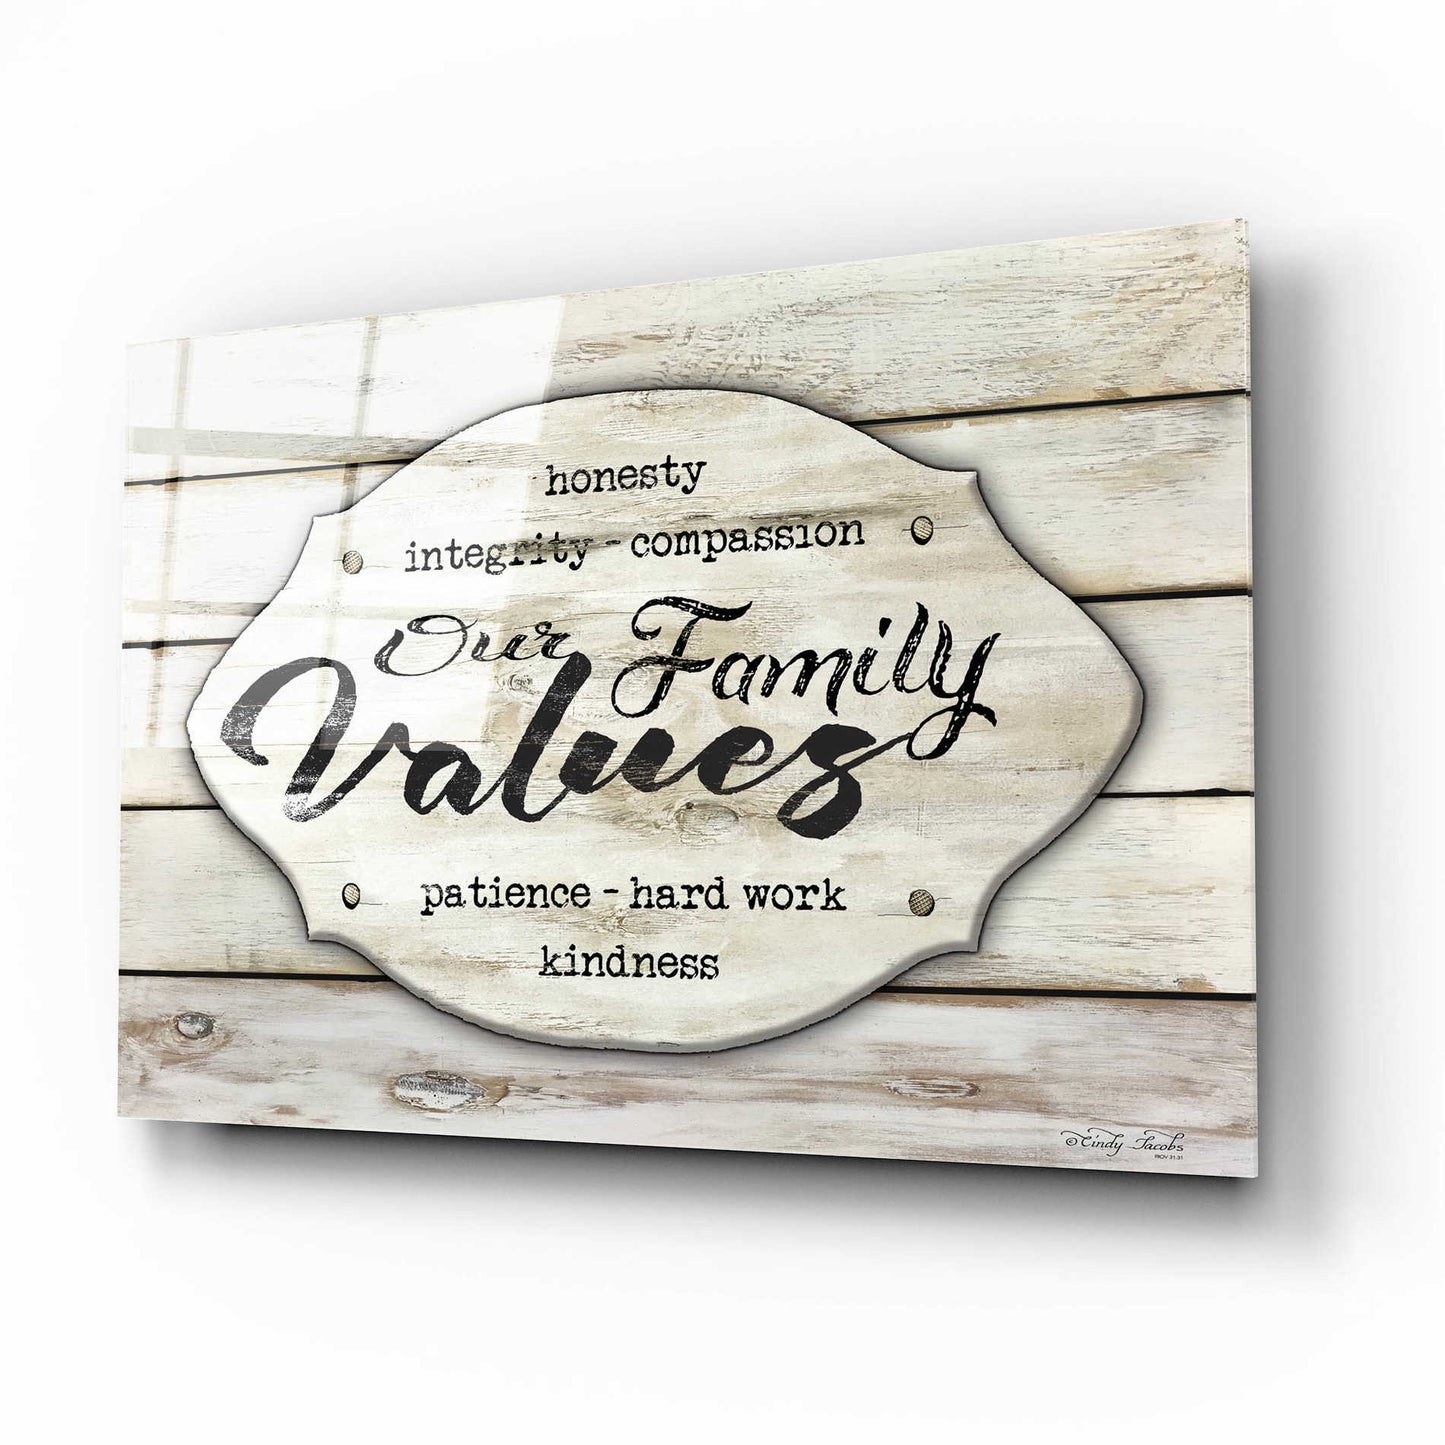 Epic Art 'Our Family Values' by Cindy Jacobs, Acrylic Glass Wall Art,16x12